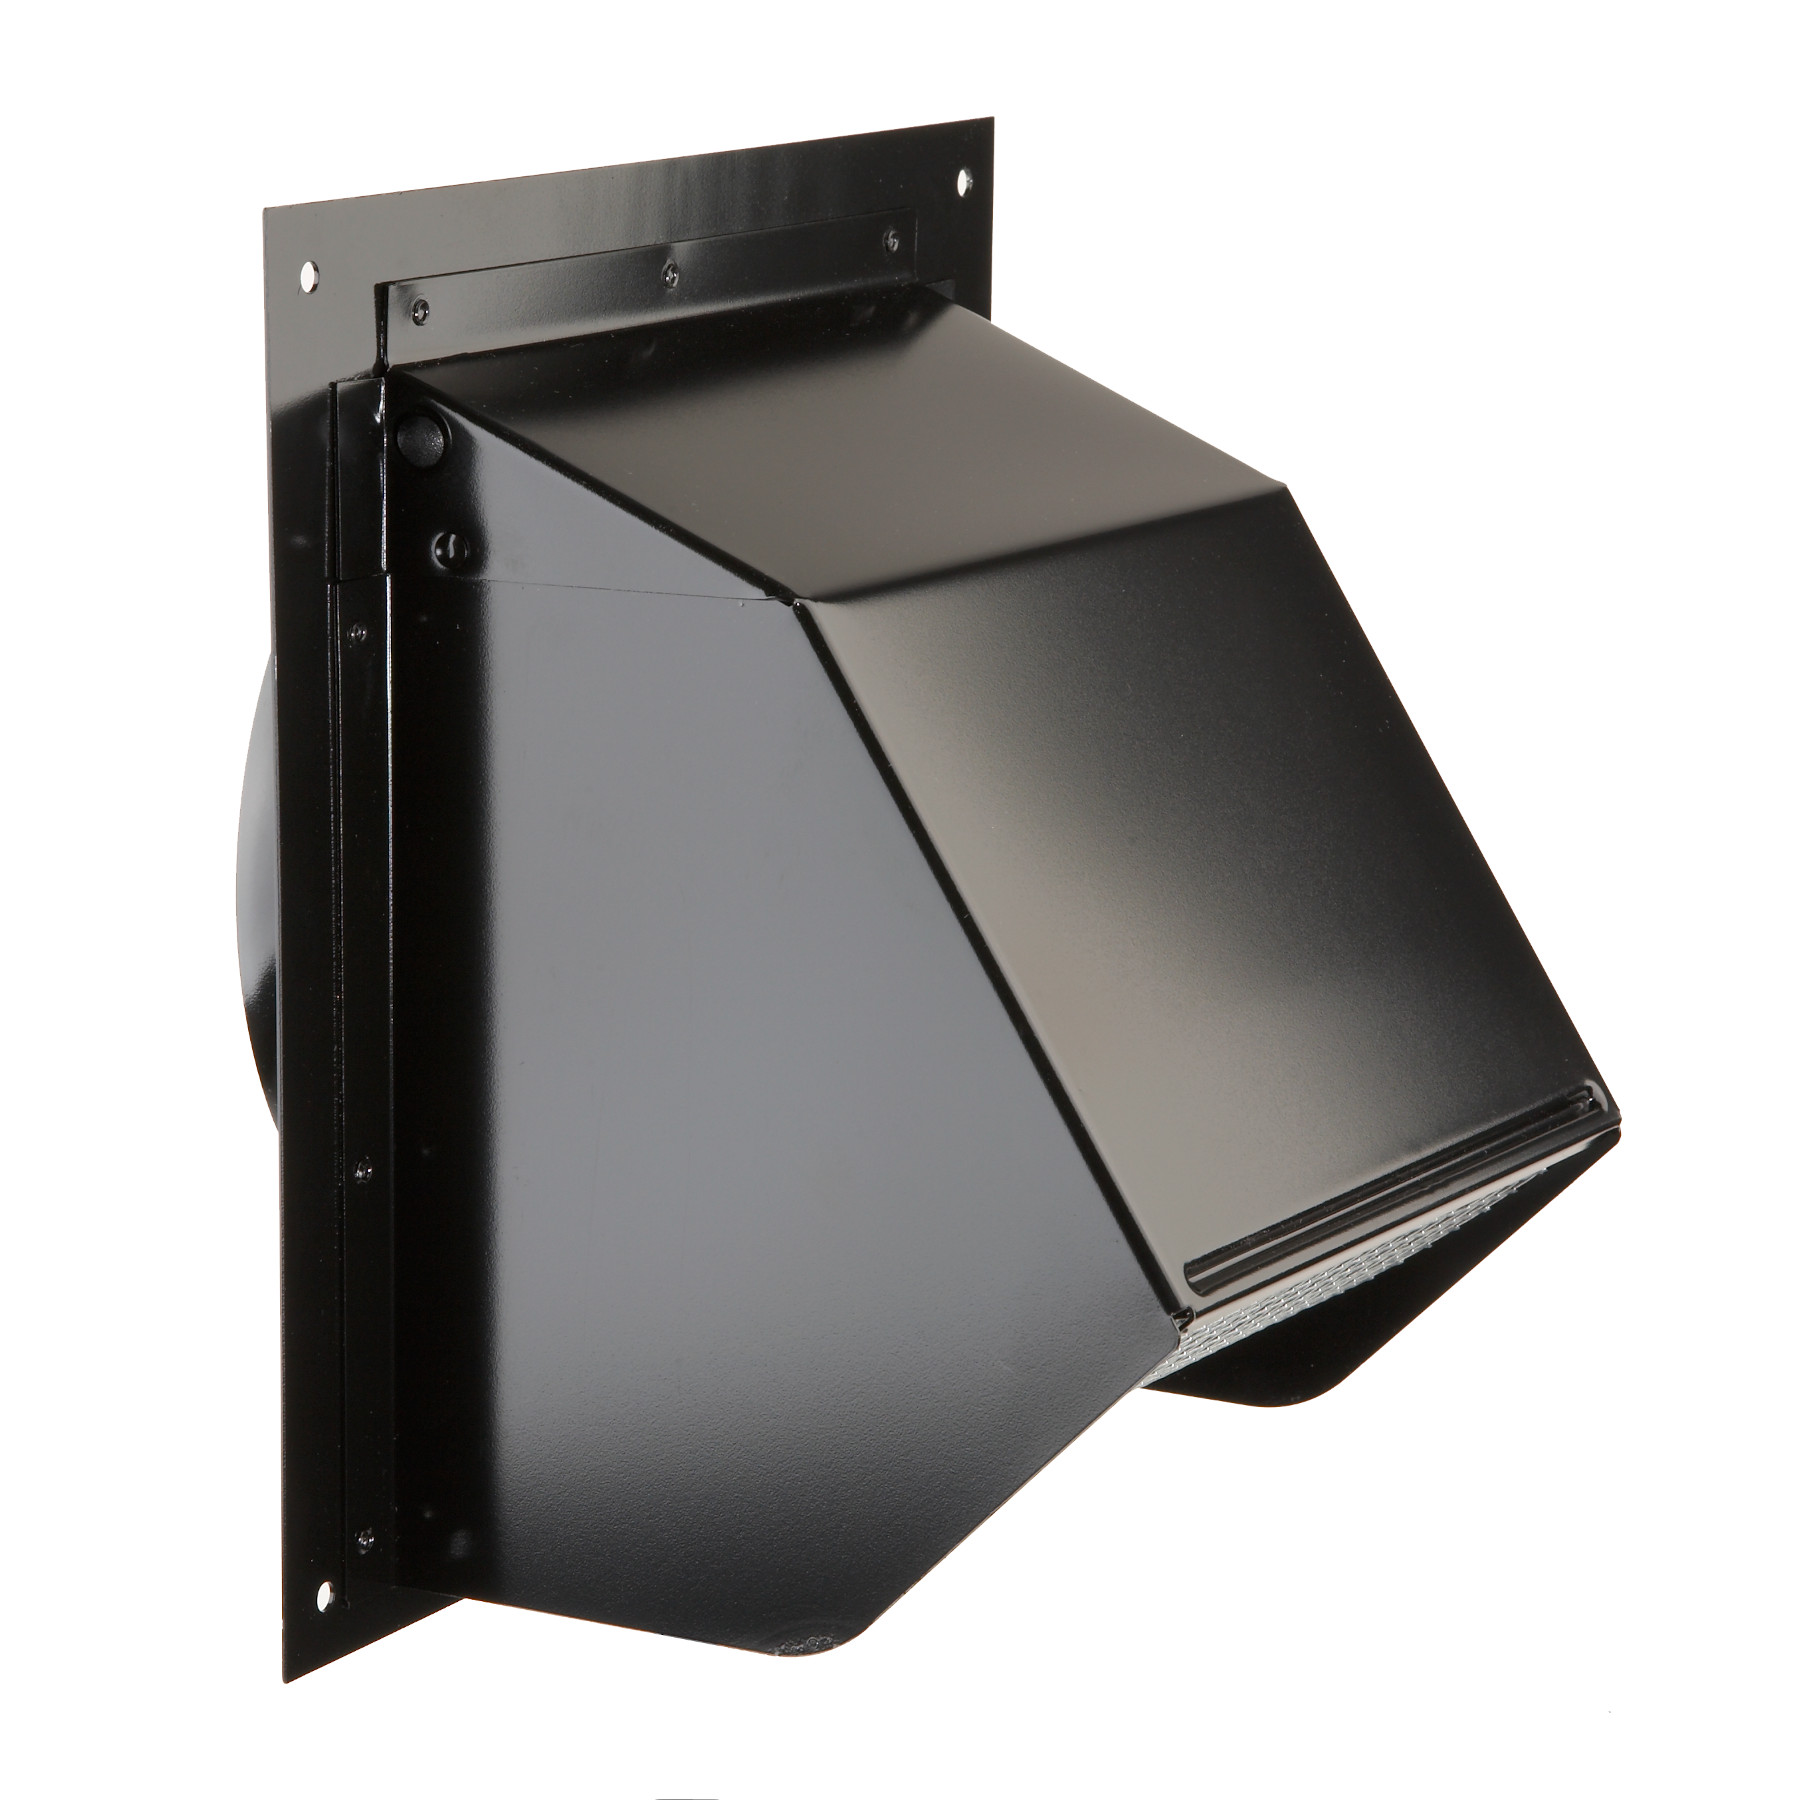 Details about   Broan 885BL Black Steel Wall Cap Vent 9 W in. 